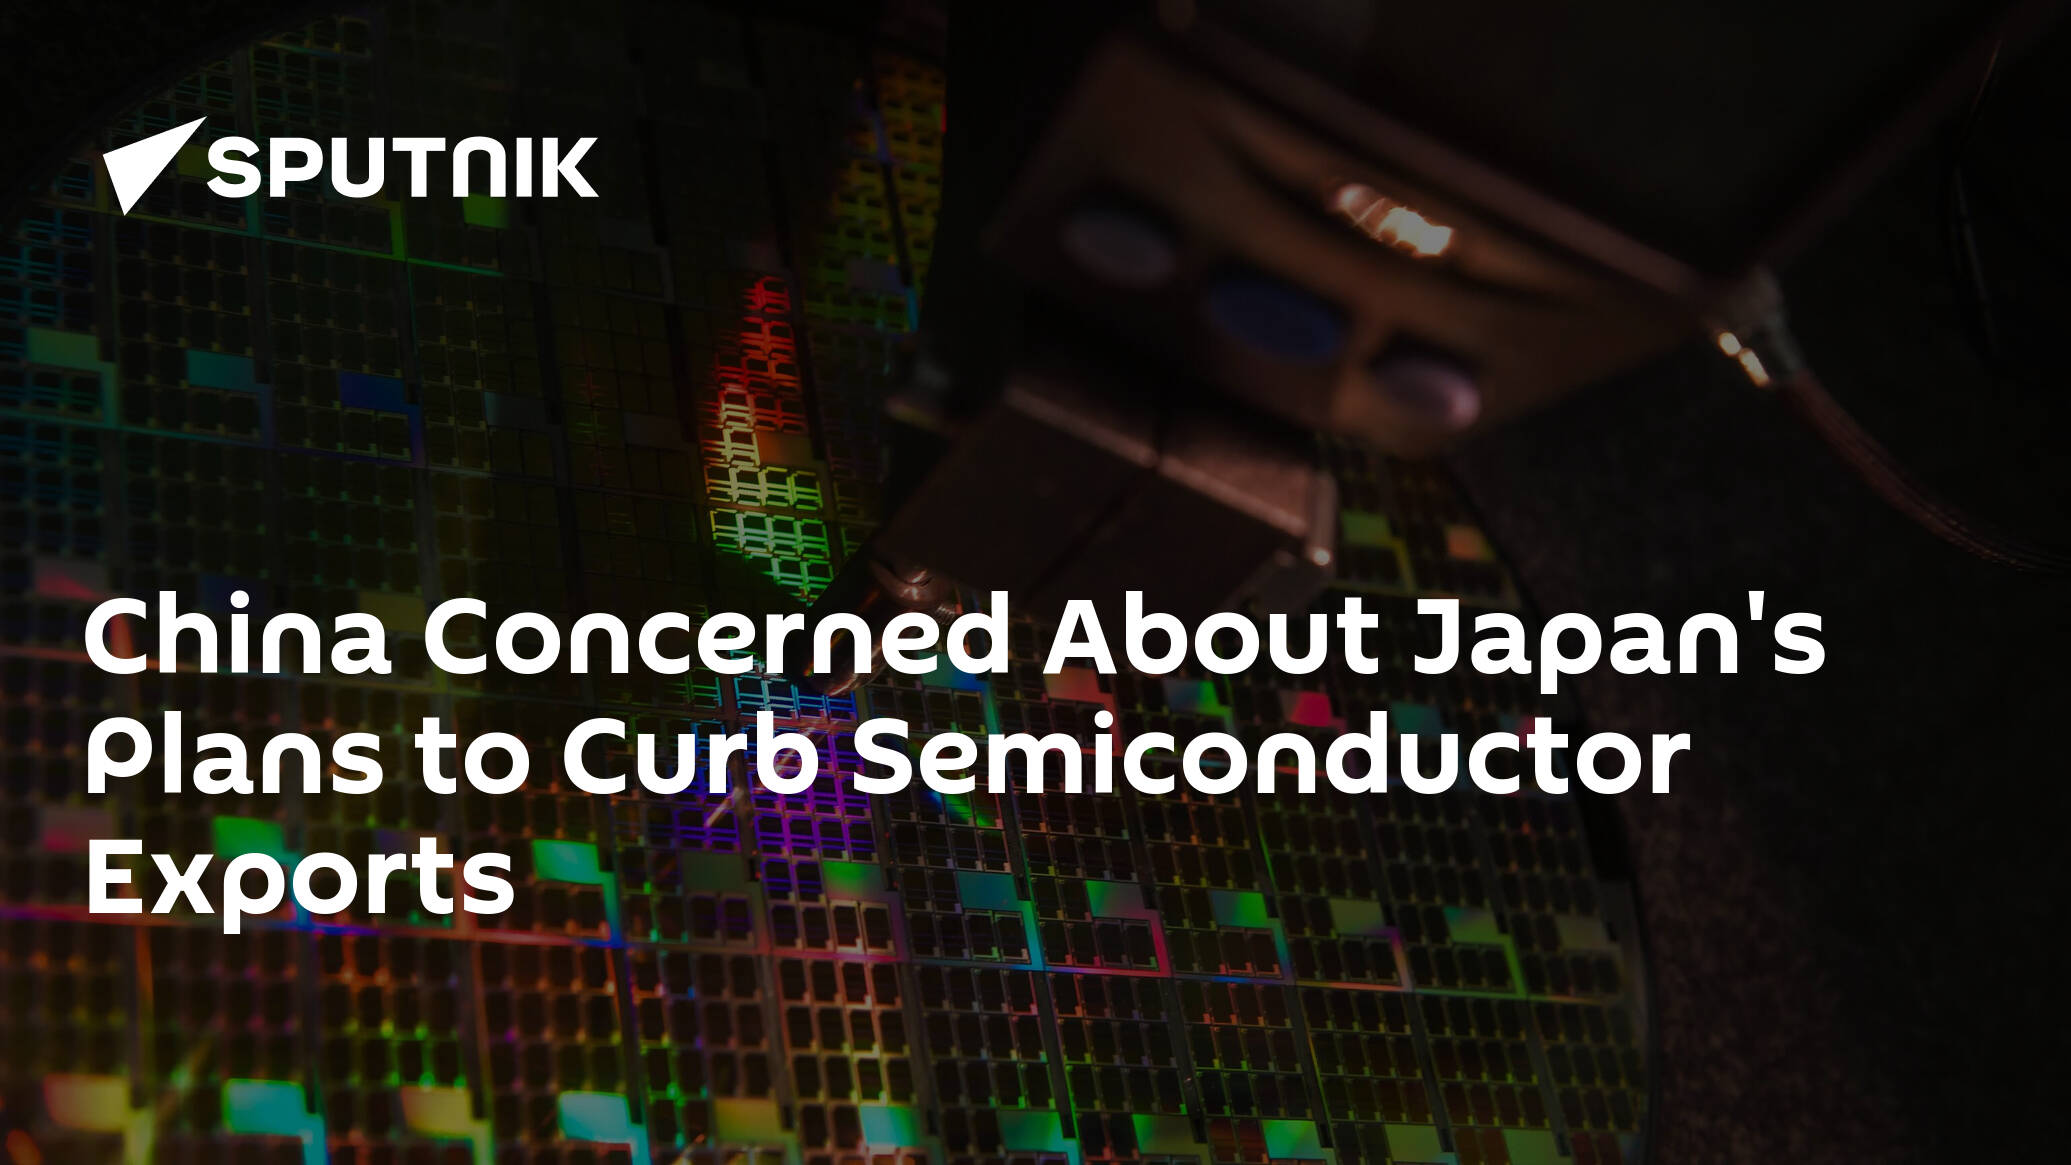 China Concerned About Japan's Plans to Curb Semiconductor Exports